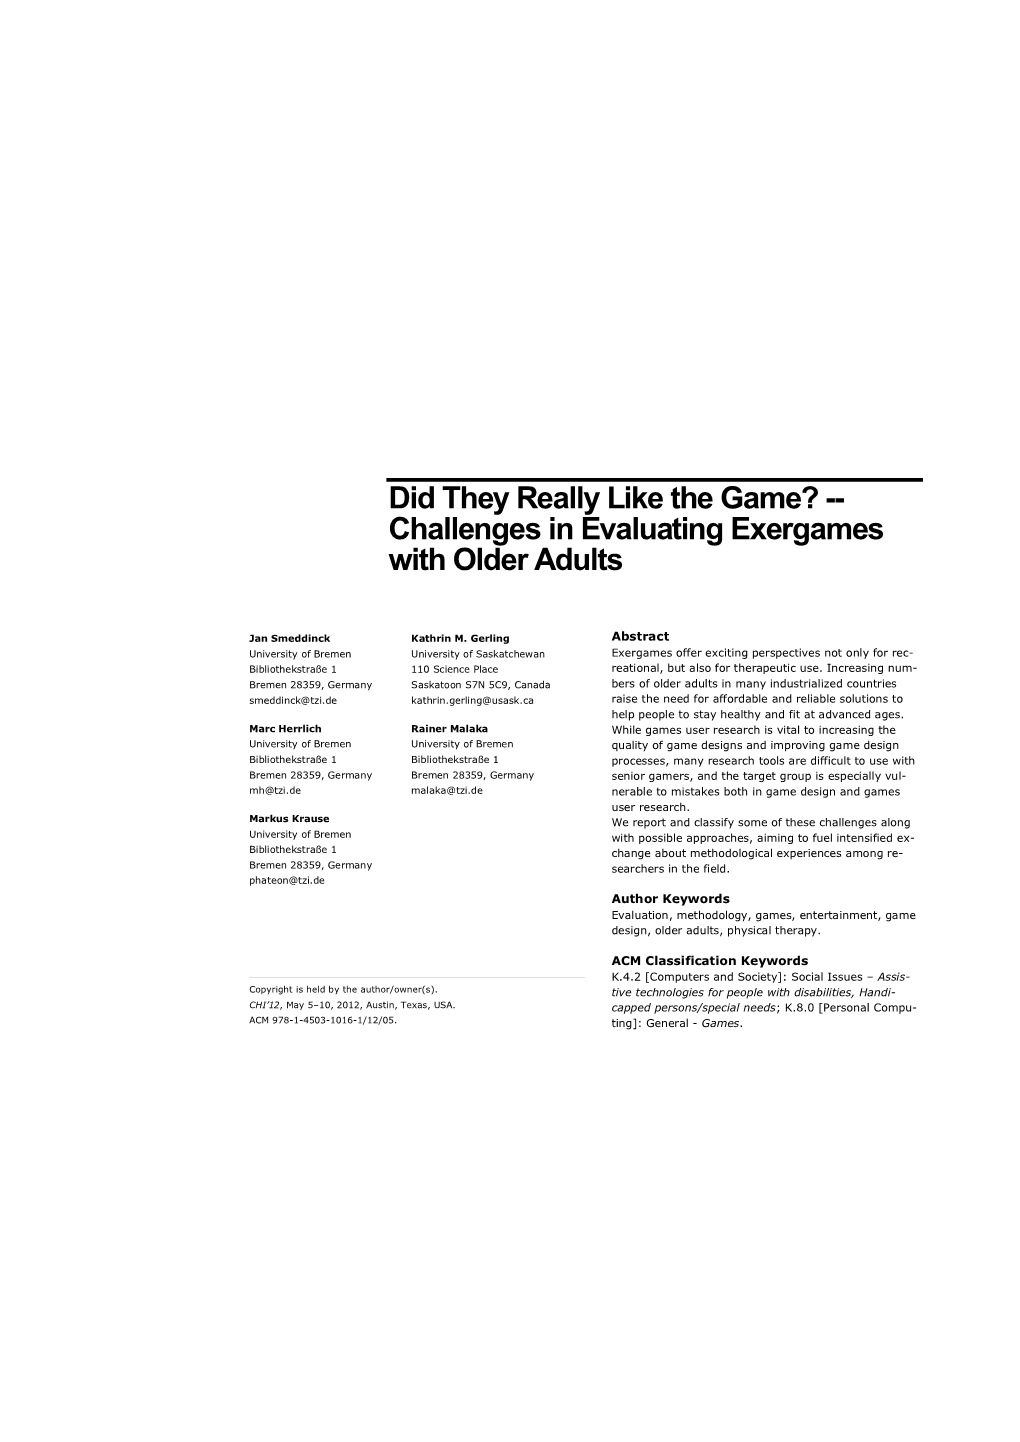 Challenges in Evaluating Exergames with Older Adults